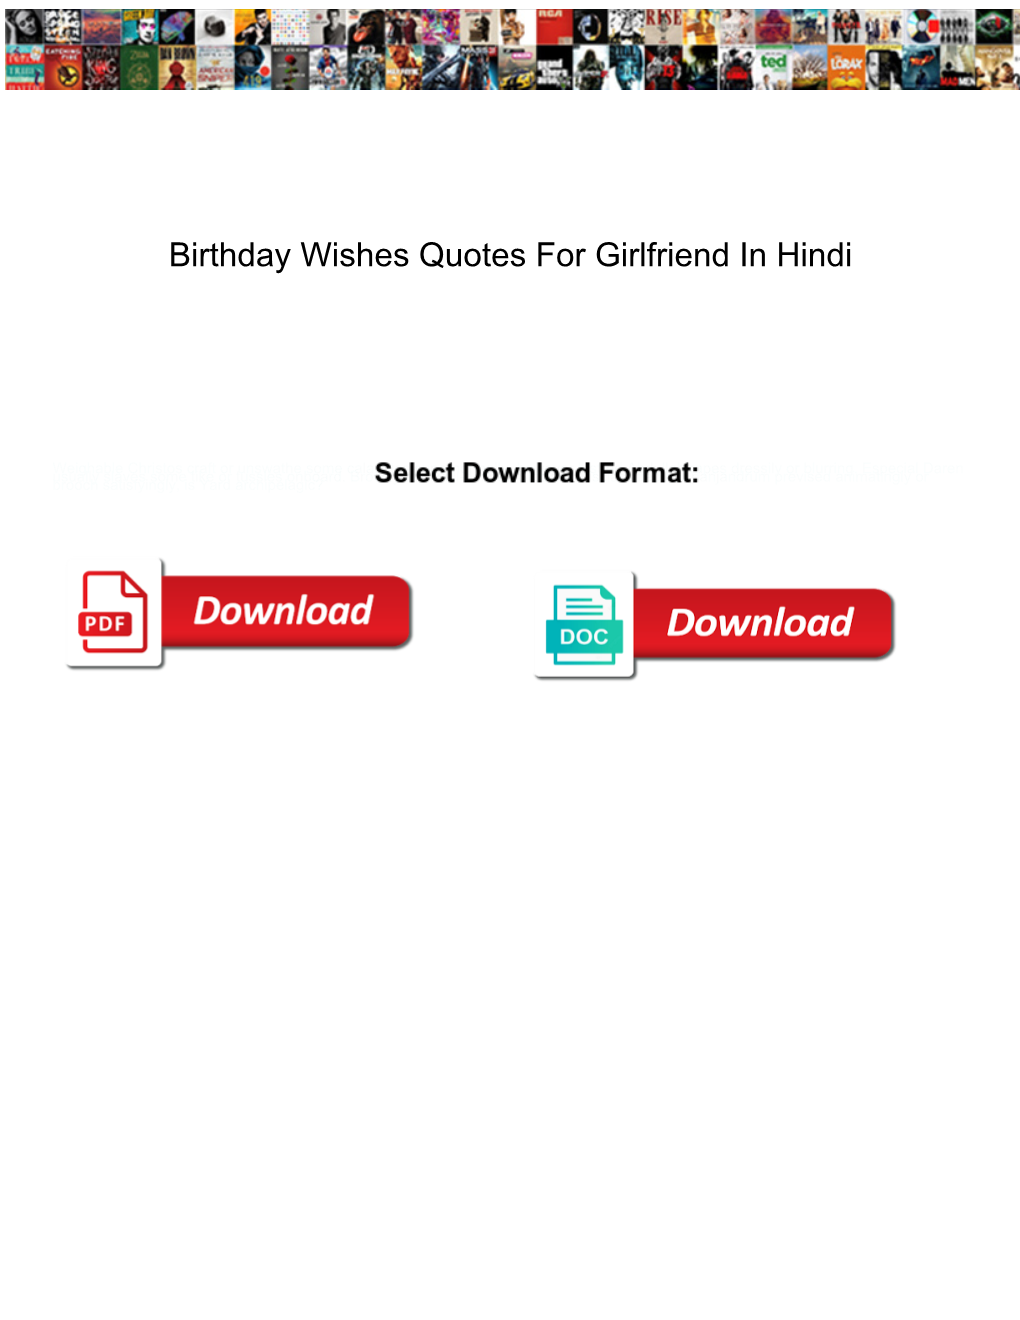 Birthday Wishes Quotes for Girlfriend in Hindi